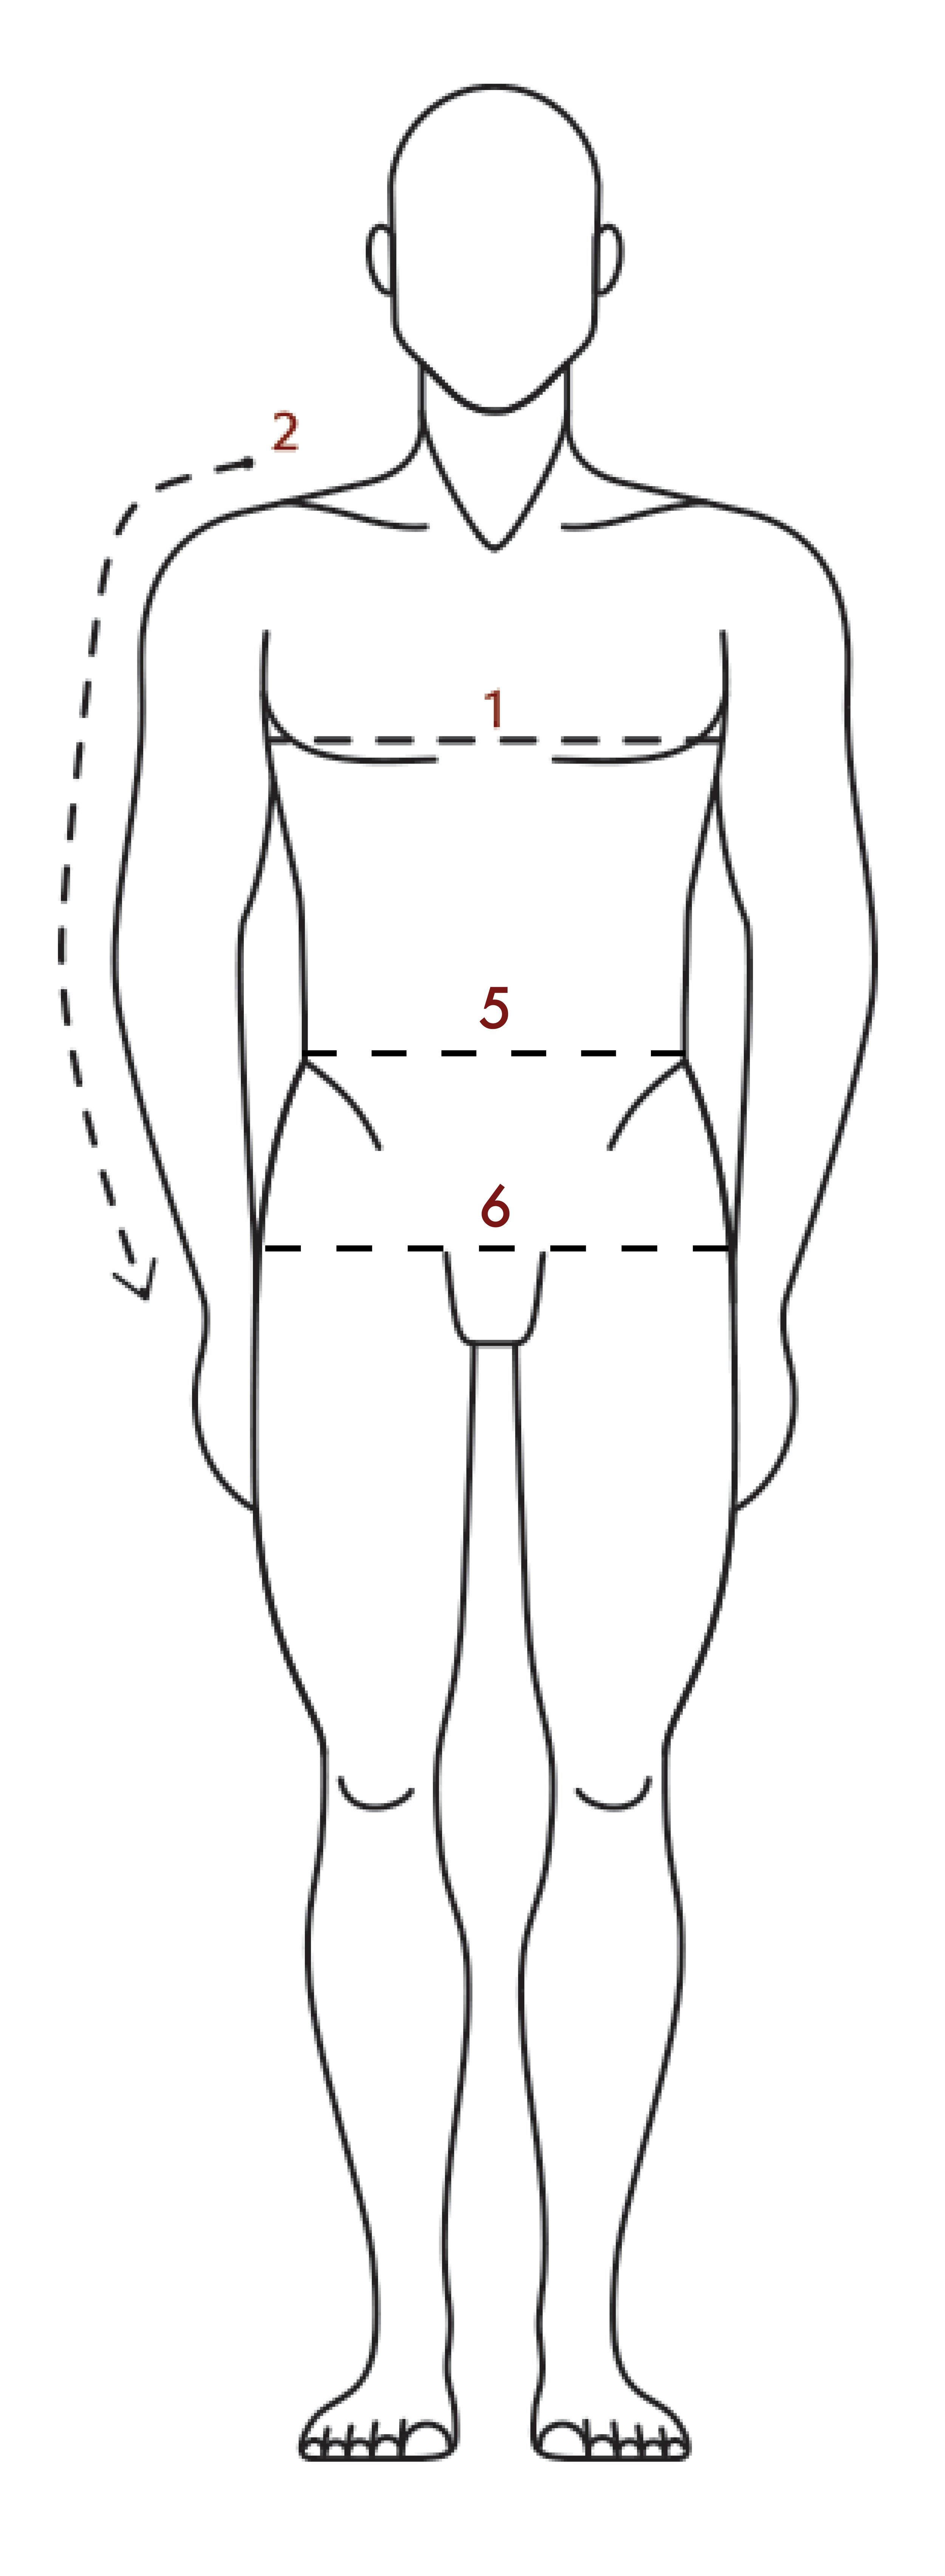 How to Take Body Measurements for Men